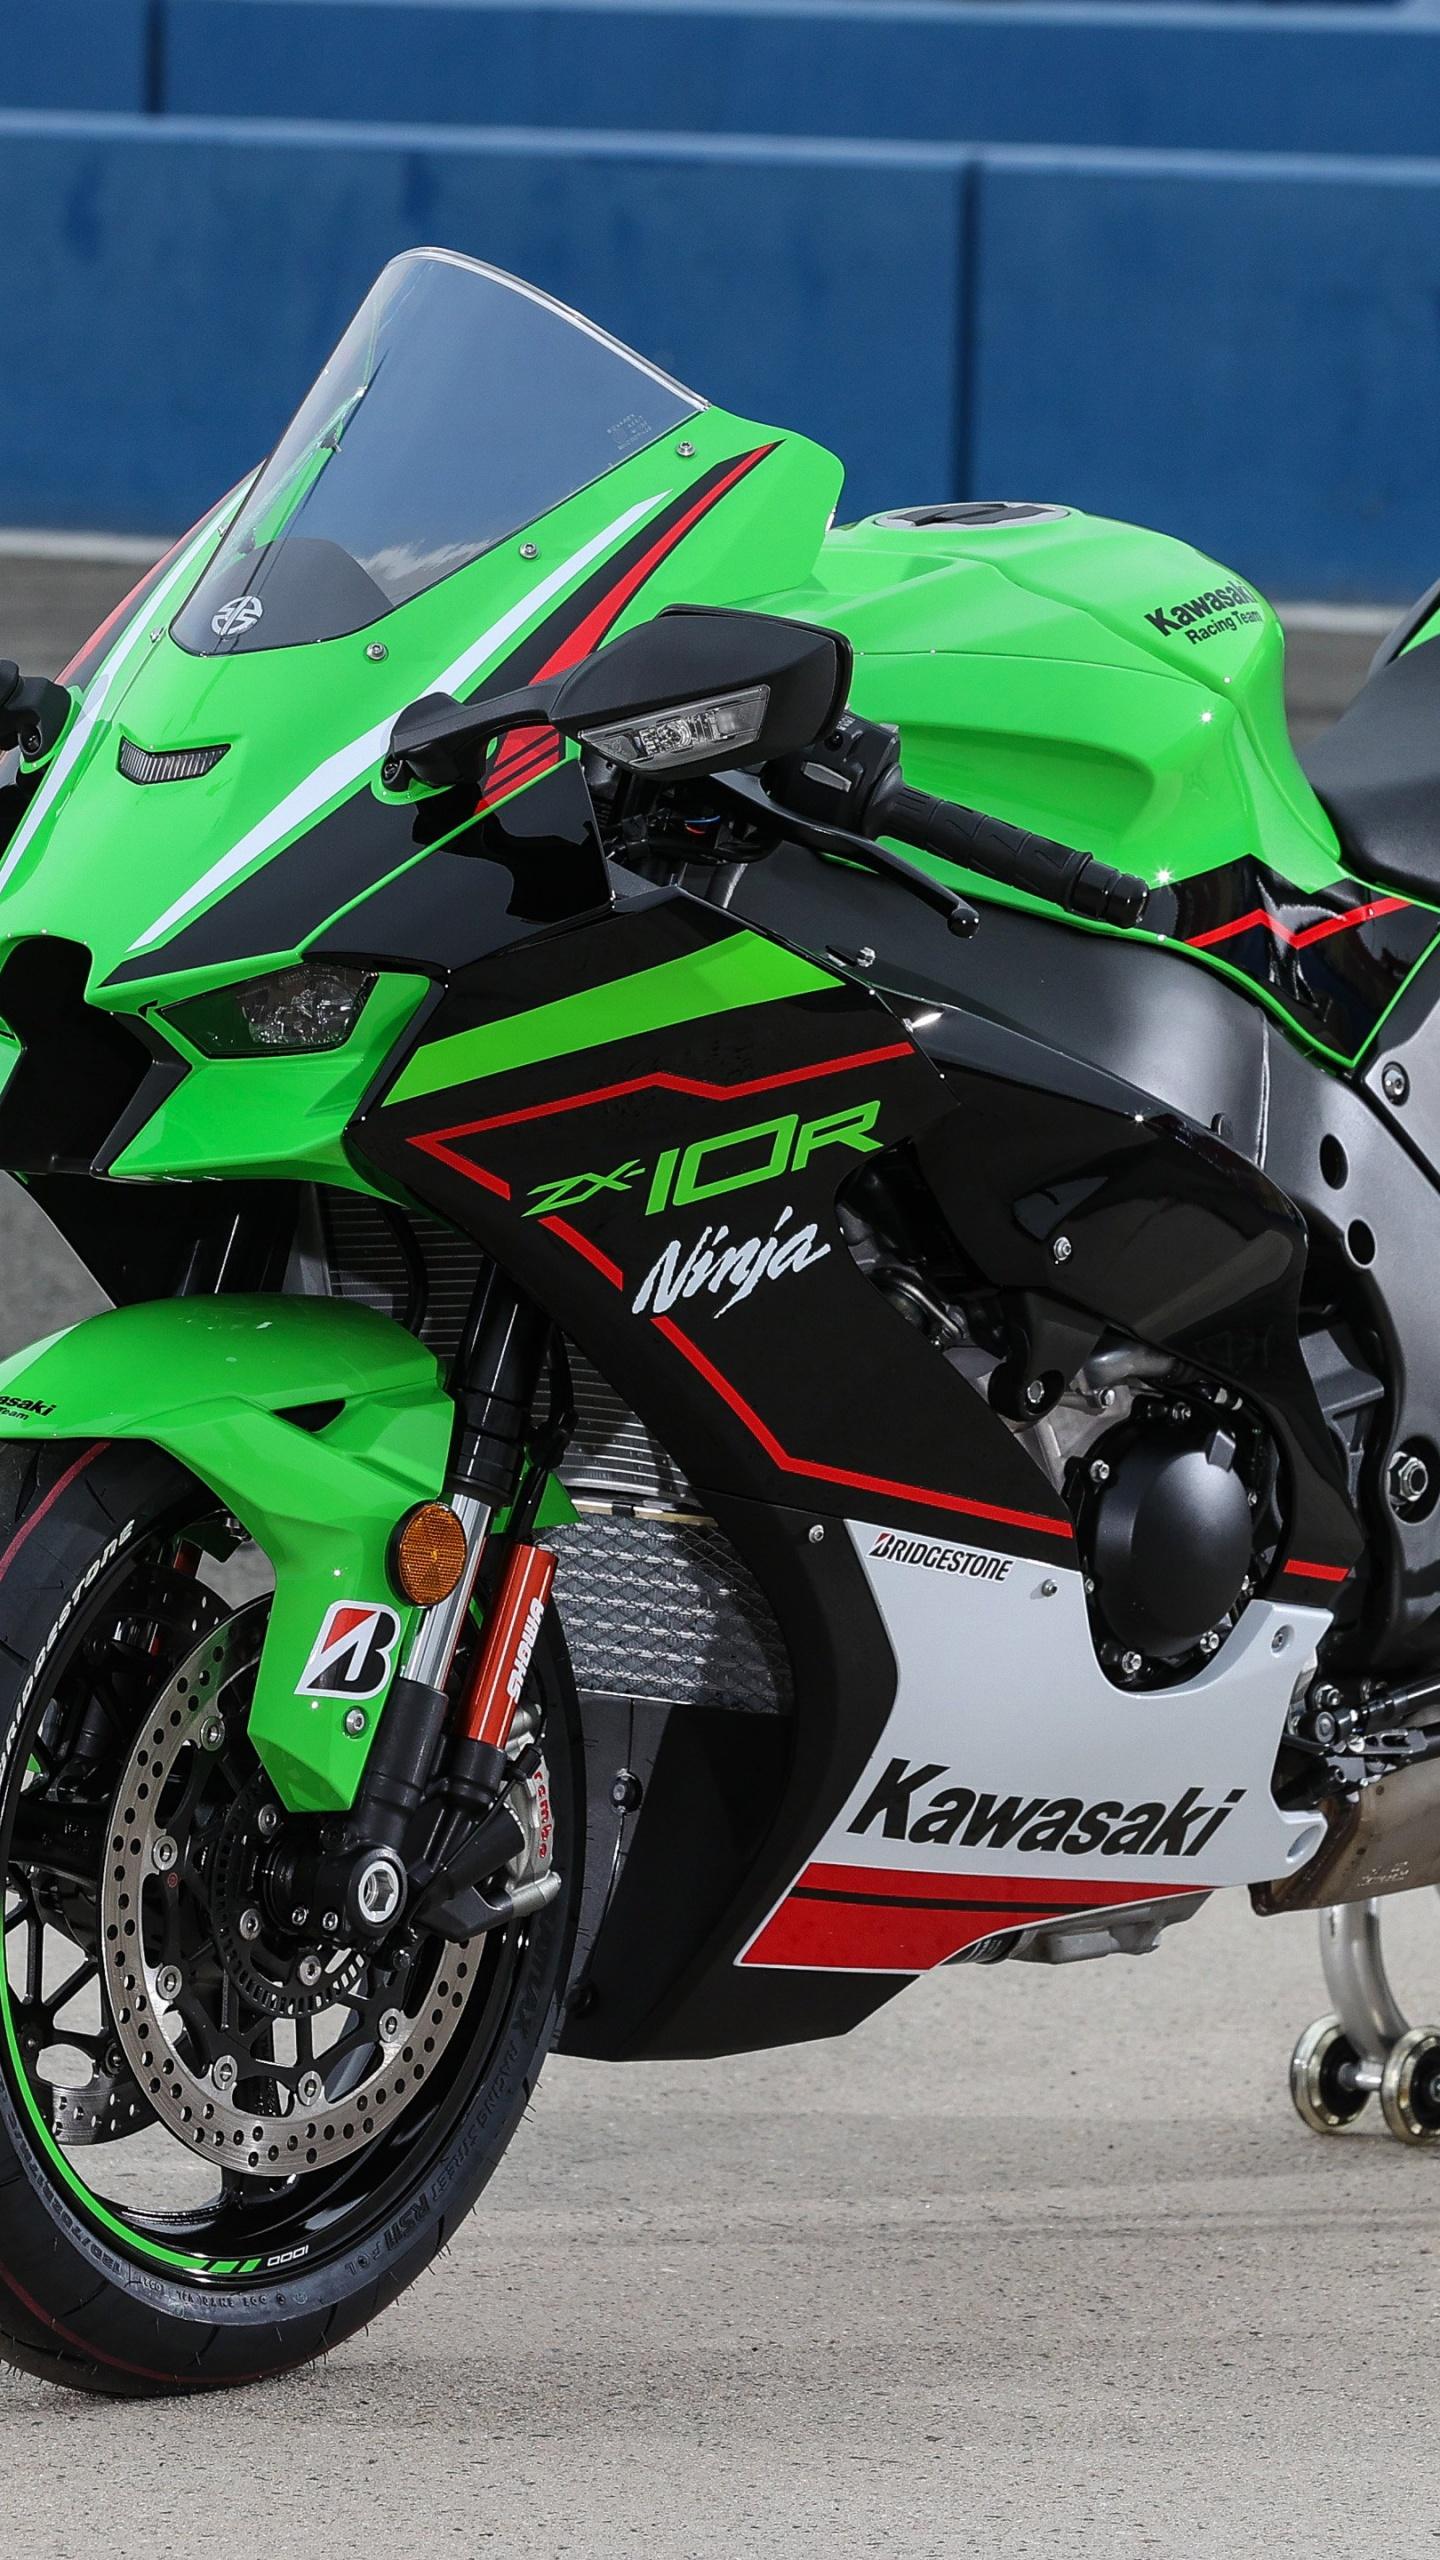 Kawasaki Zx10rr Pictures  Download Free Images on Unsplash